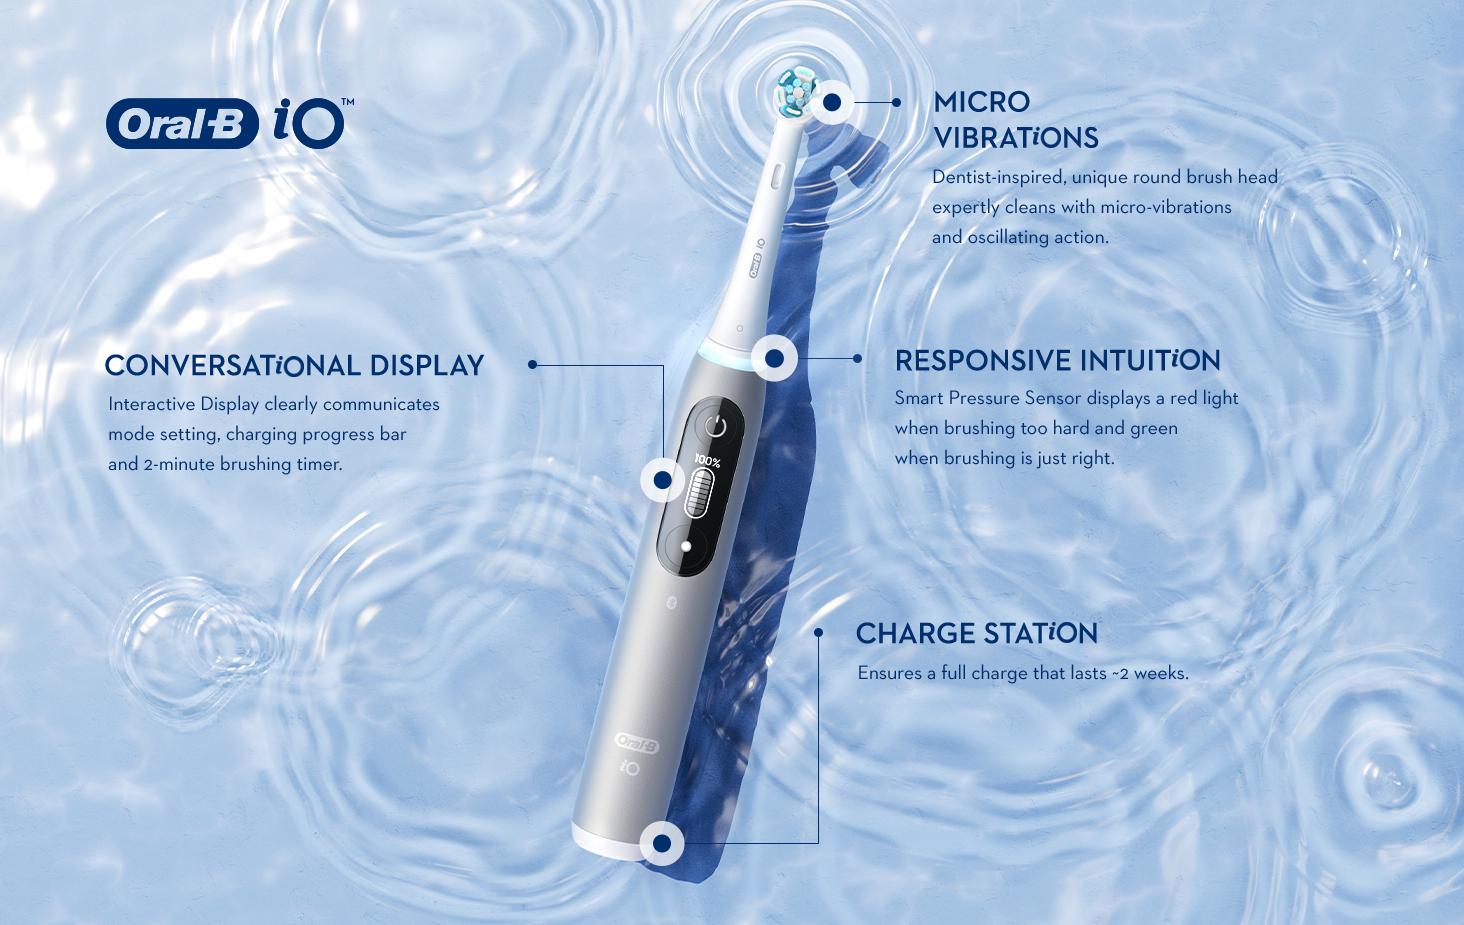 Oral-B iO Series 9 black onyx electric toothbrush features explained via hotspots